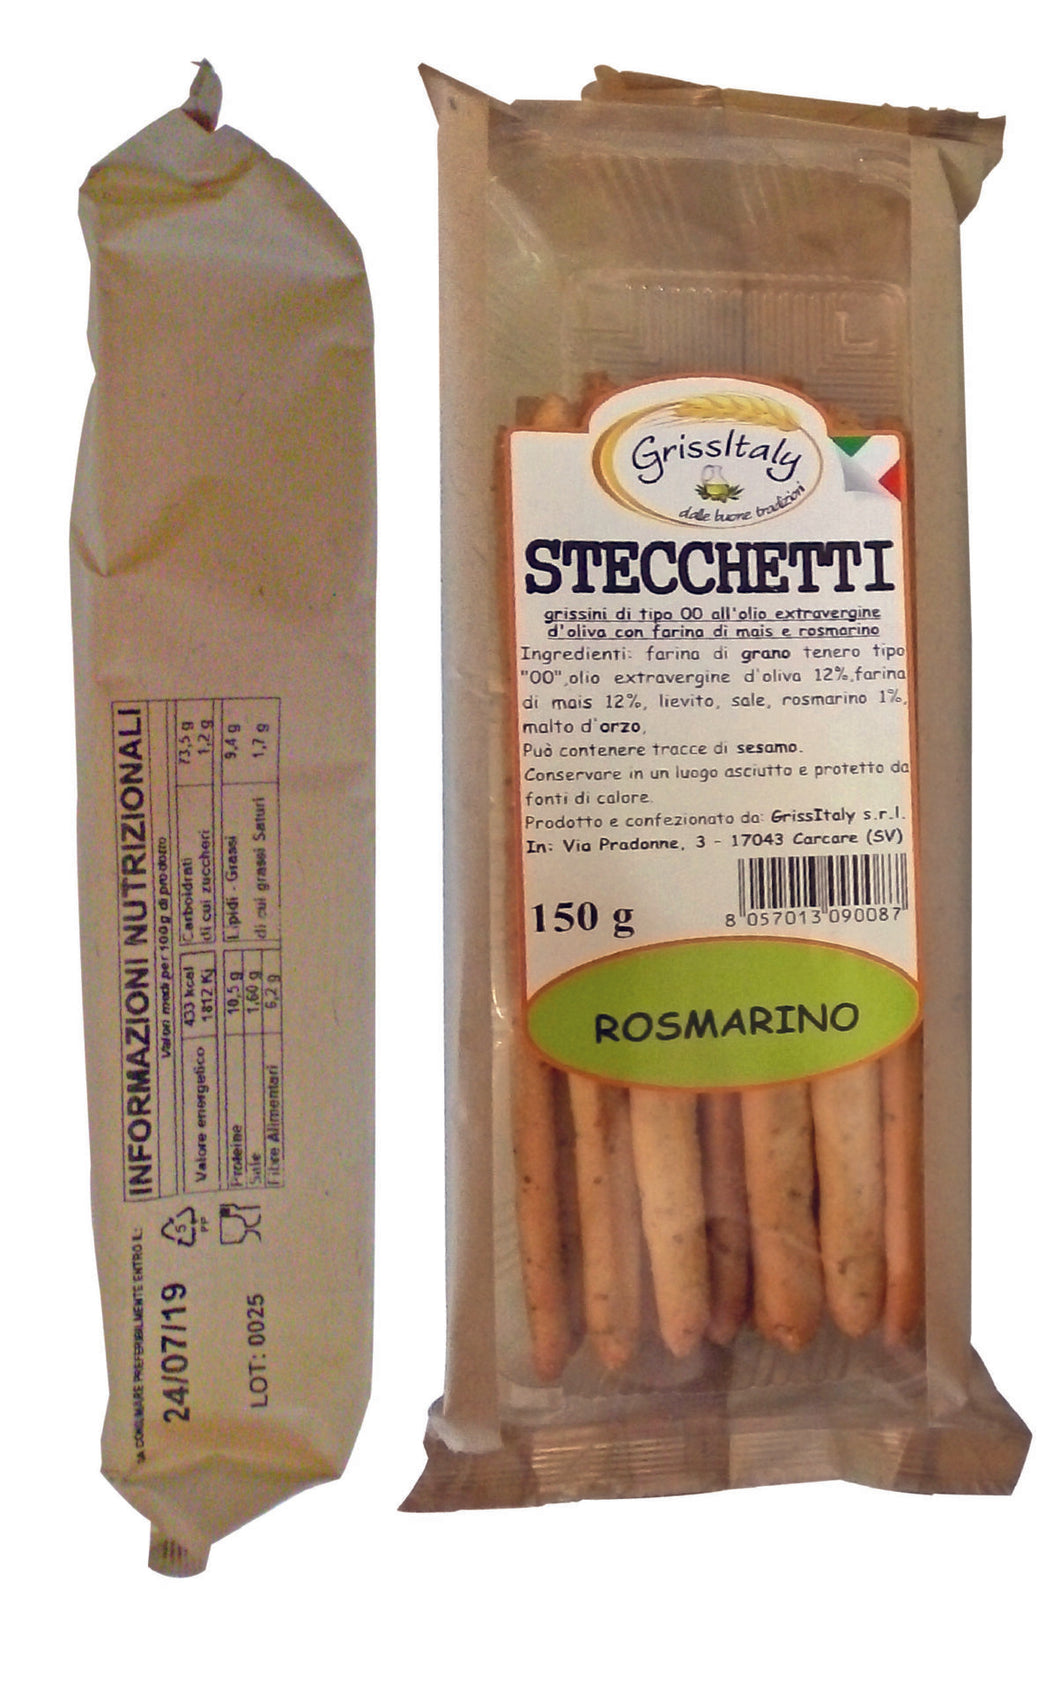 Grissitaly Corn Breadstick with Rosemary (Stecchetti) (150gr) 5.29 oz